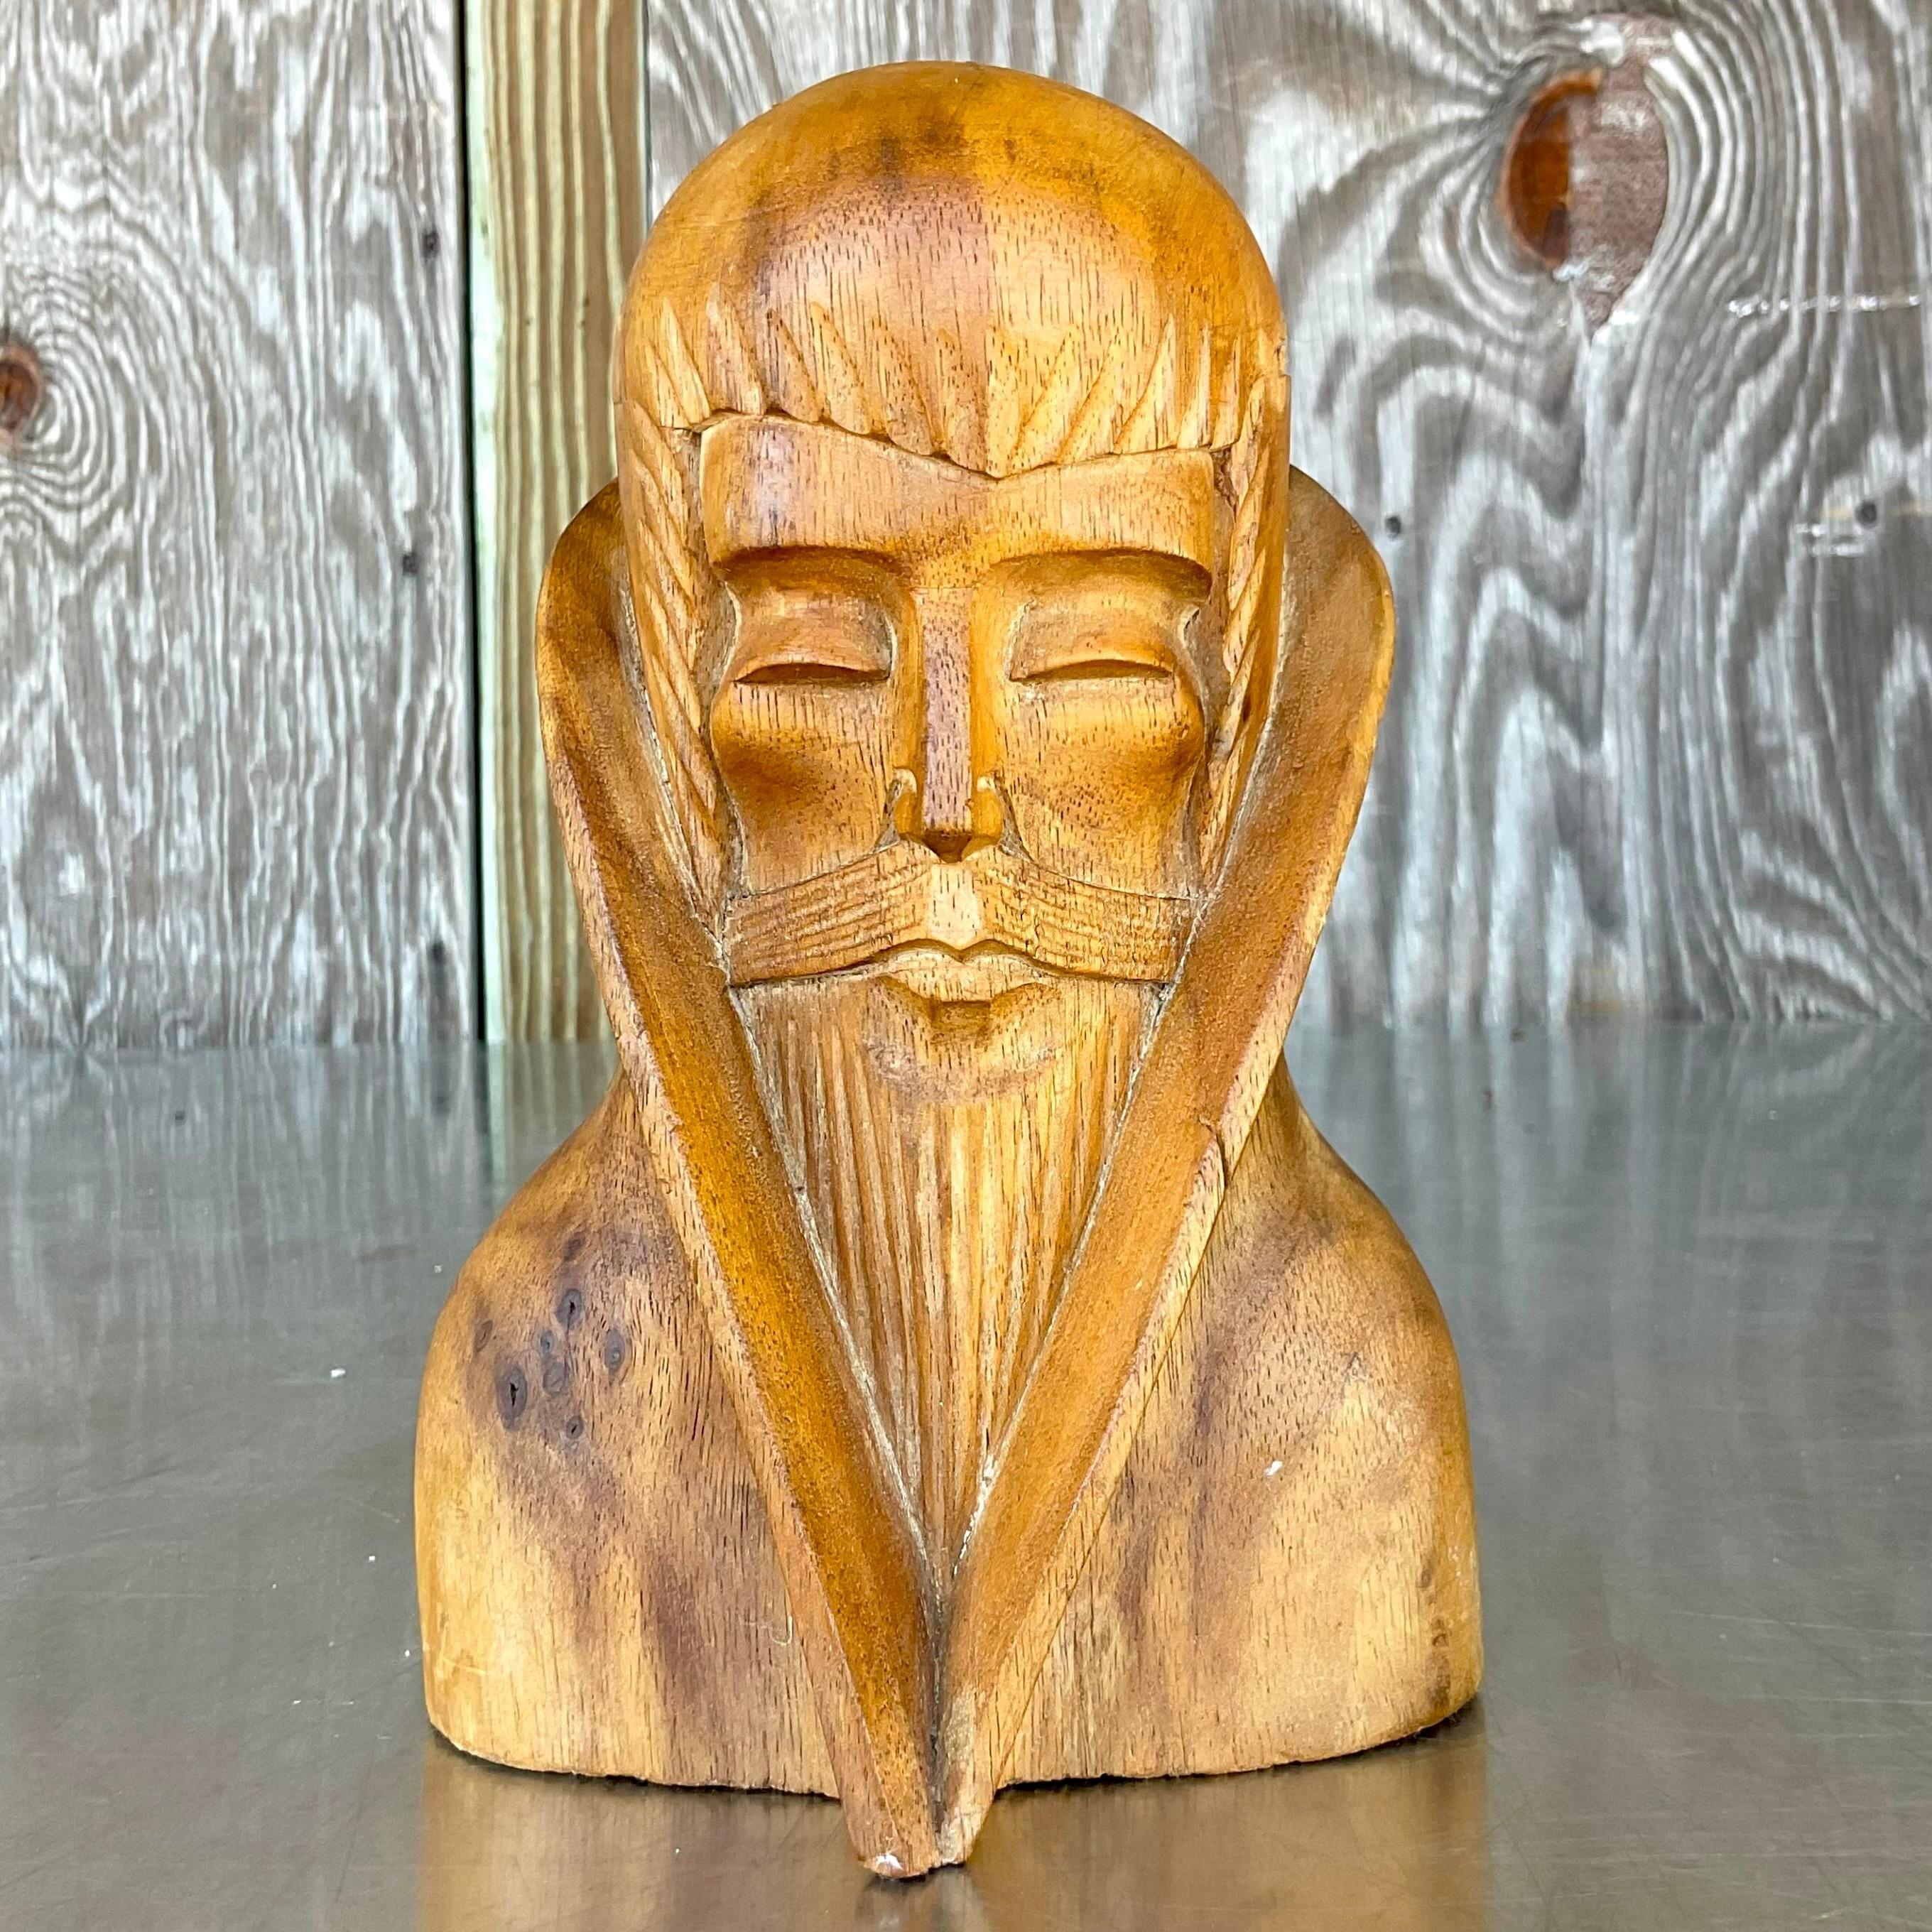 Capture attention with our Vintage Boho Hand Carved Bust of a Man. This American-style piece showcases intricate craftsmanship and bohemian allure, making it a distinctive and artful addition to any eclectic or traditional décor